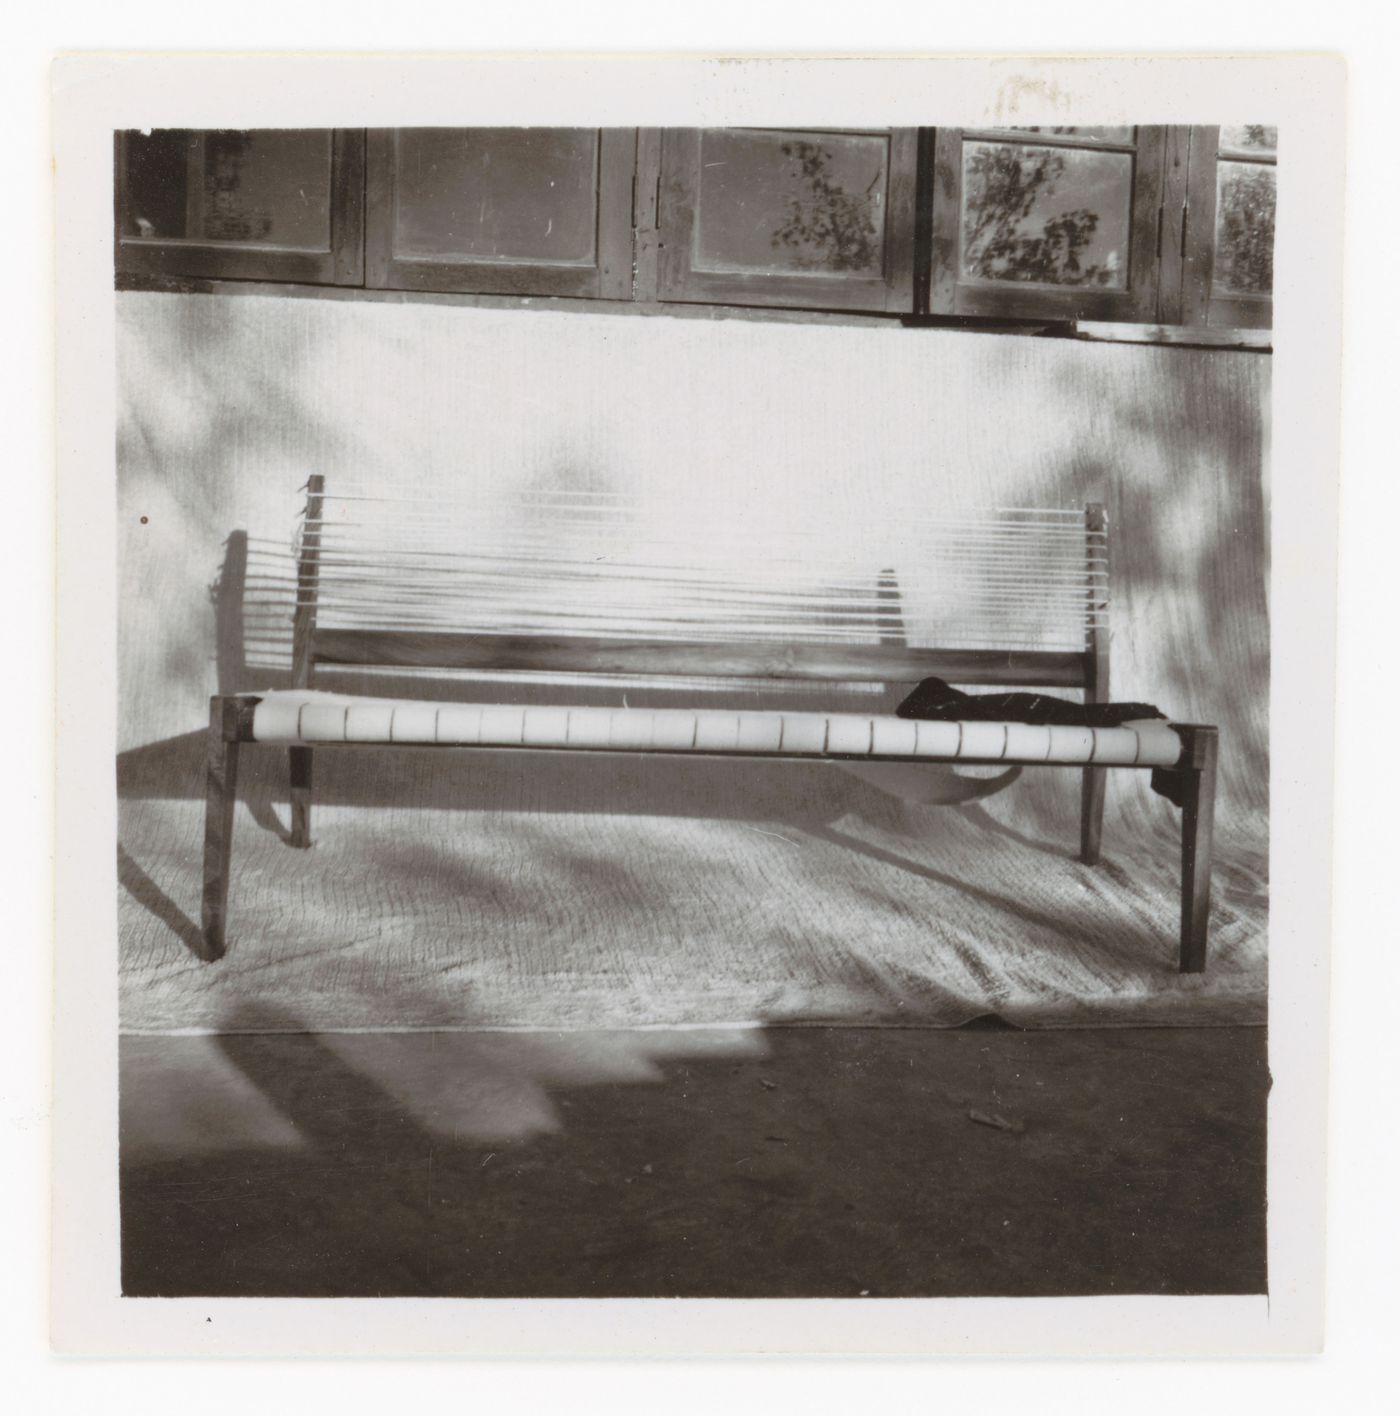 View of a banquette designed by Pierre Jeanneret, Chandigarh, India